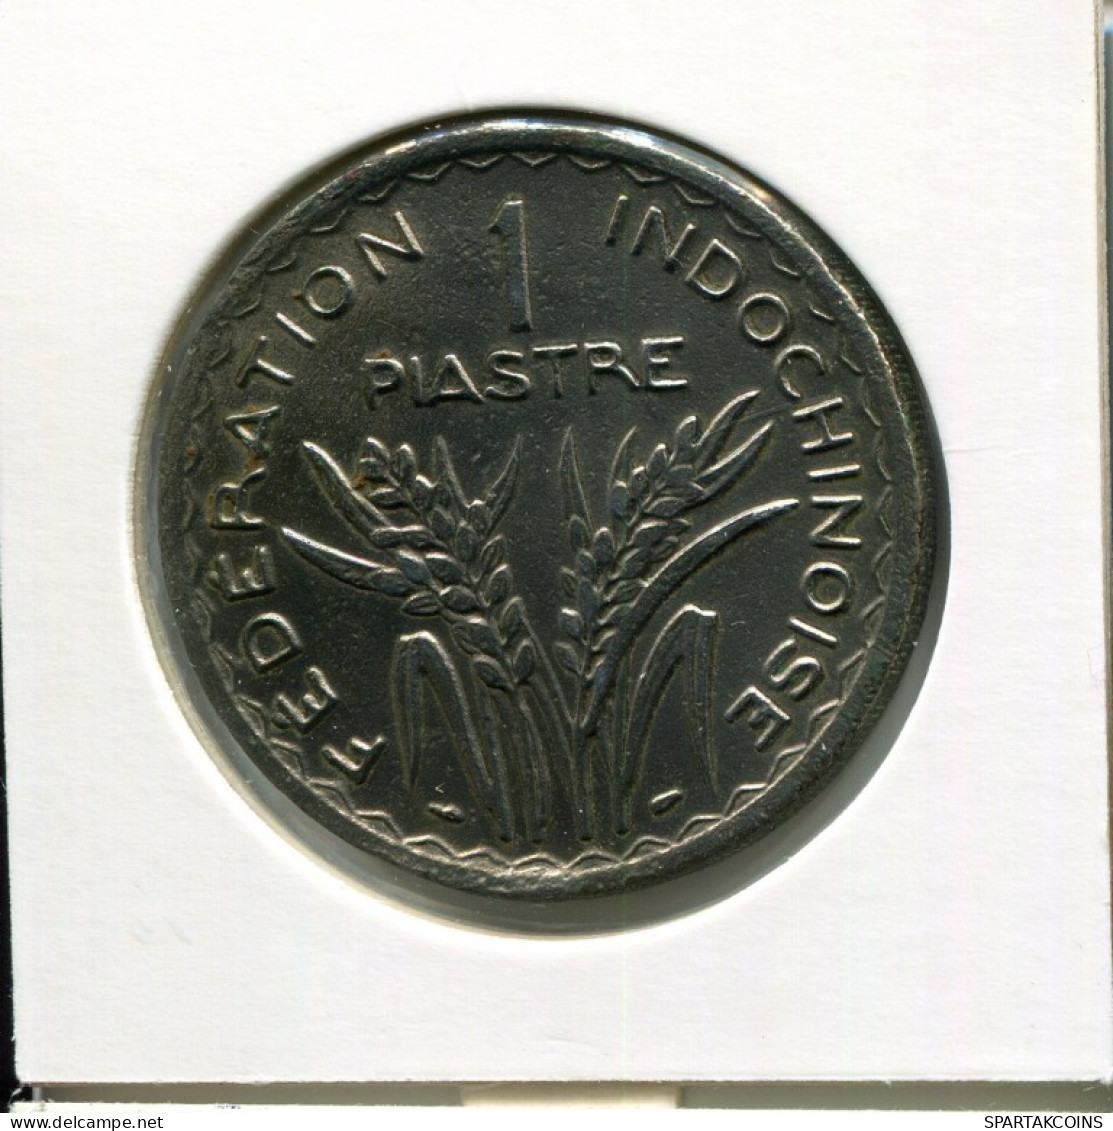 1 PIASTRE 1947 INDOCHINE Française FRENCH INDOCHINA Colonial Pièce #AM495.F.A - French Indochina